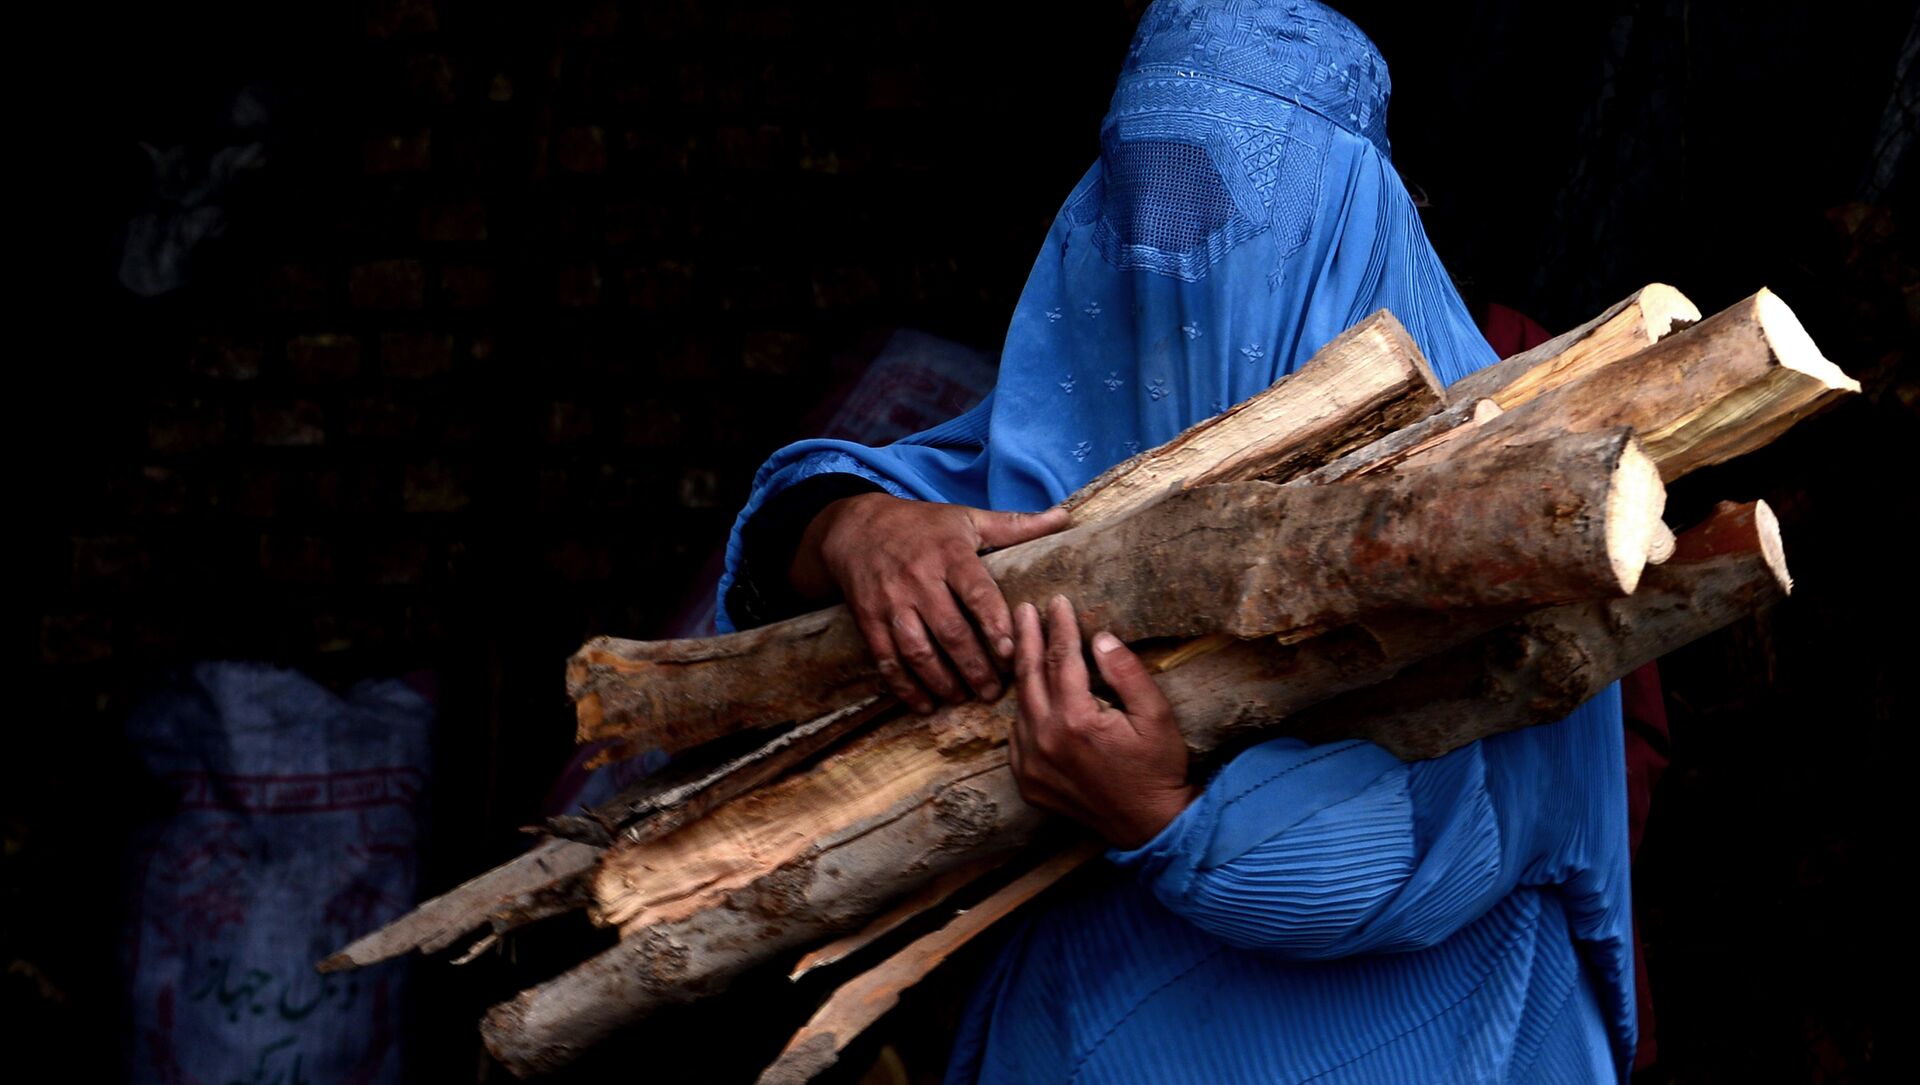 In this photograph taken on February 23, 2015, a burqa-clad Afghan woman carries chopped logs after buying them at a firewood yard in Herat - Sputnik International, 1920, 22.08.2021